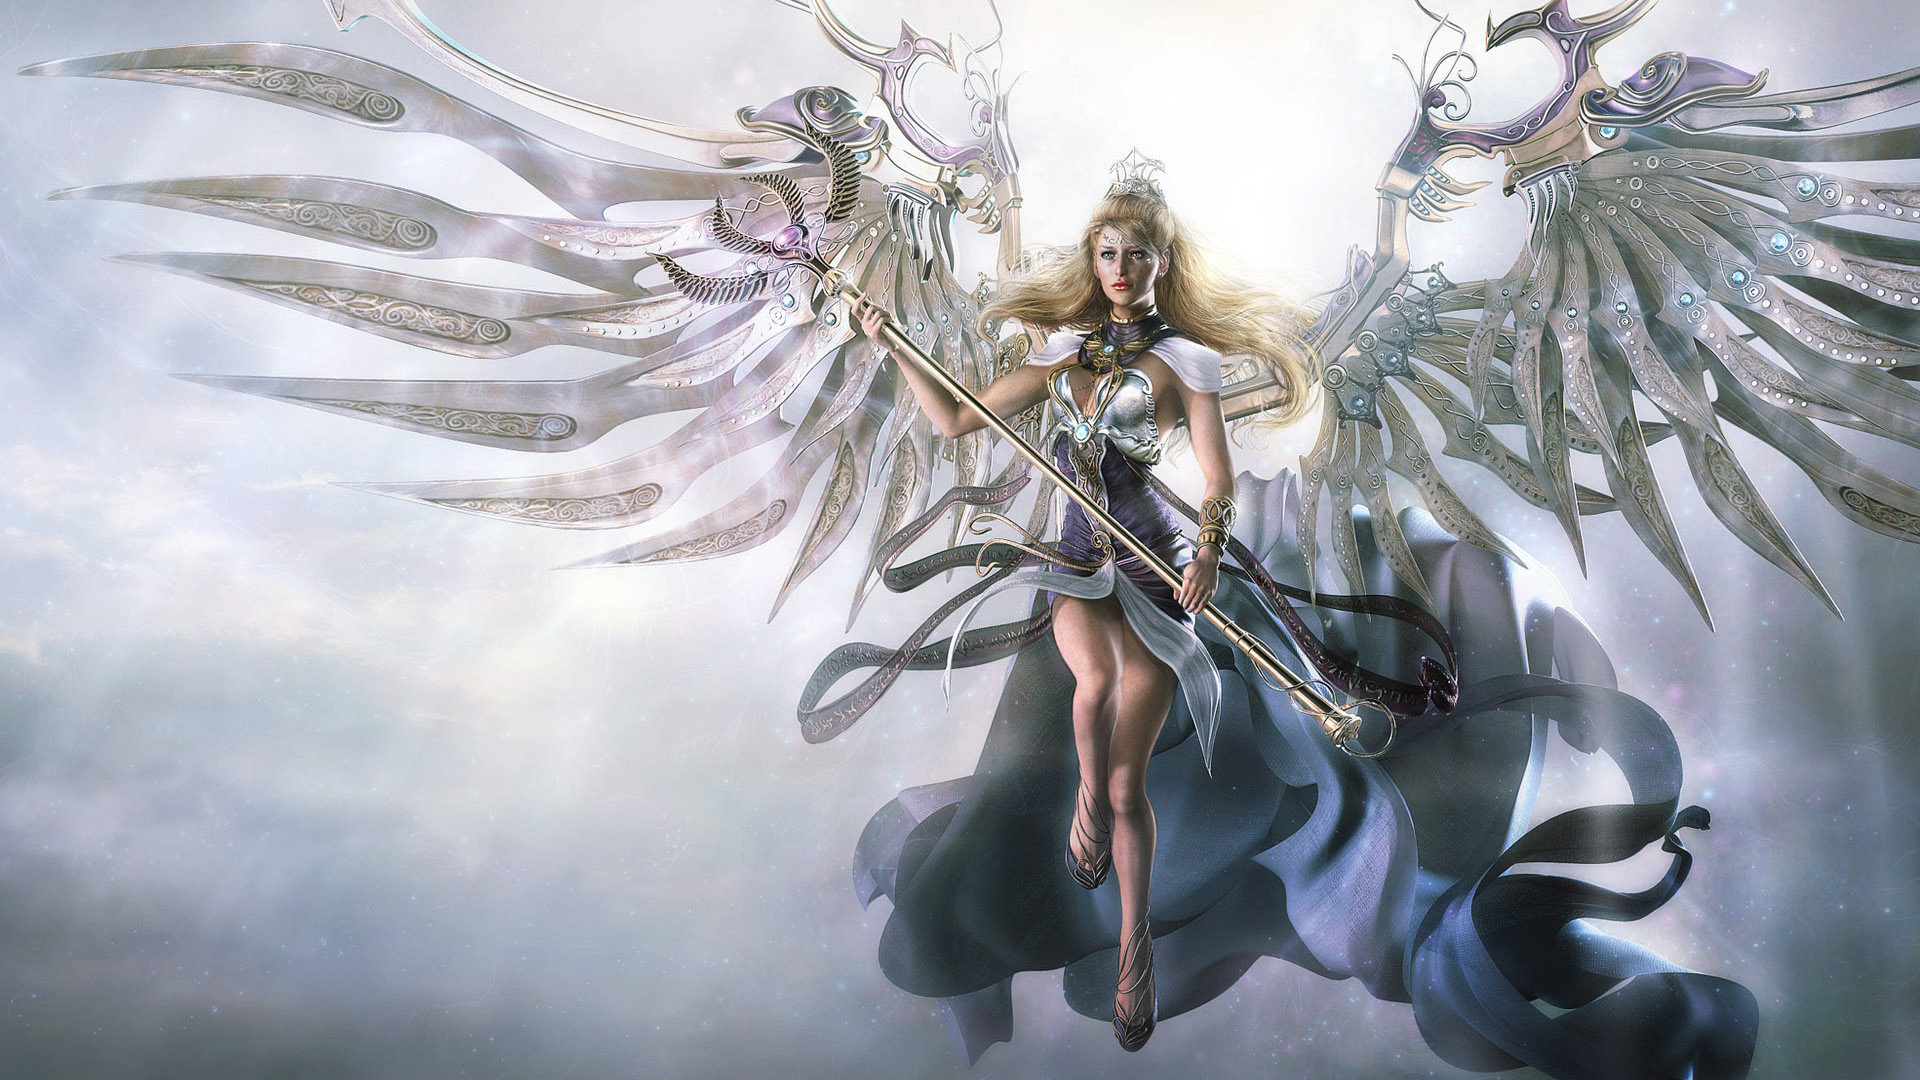 1920x1080 Awesome Angel 3D Fantasy Wallpaper HD Widescreen 1080P Wallpaper With